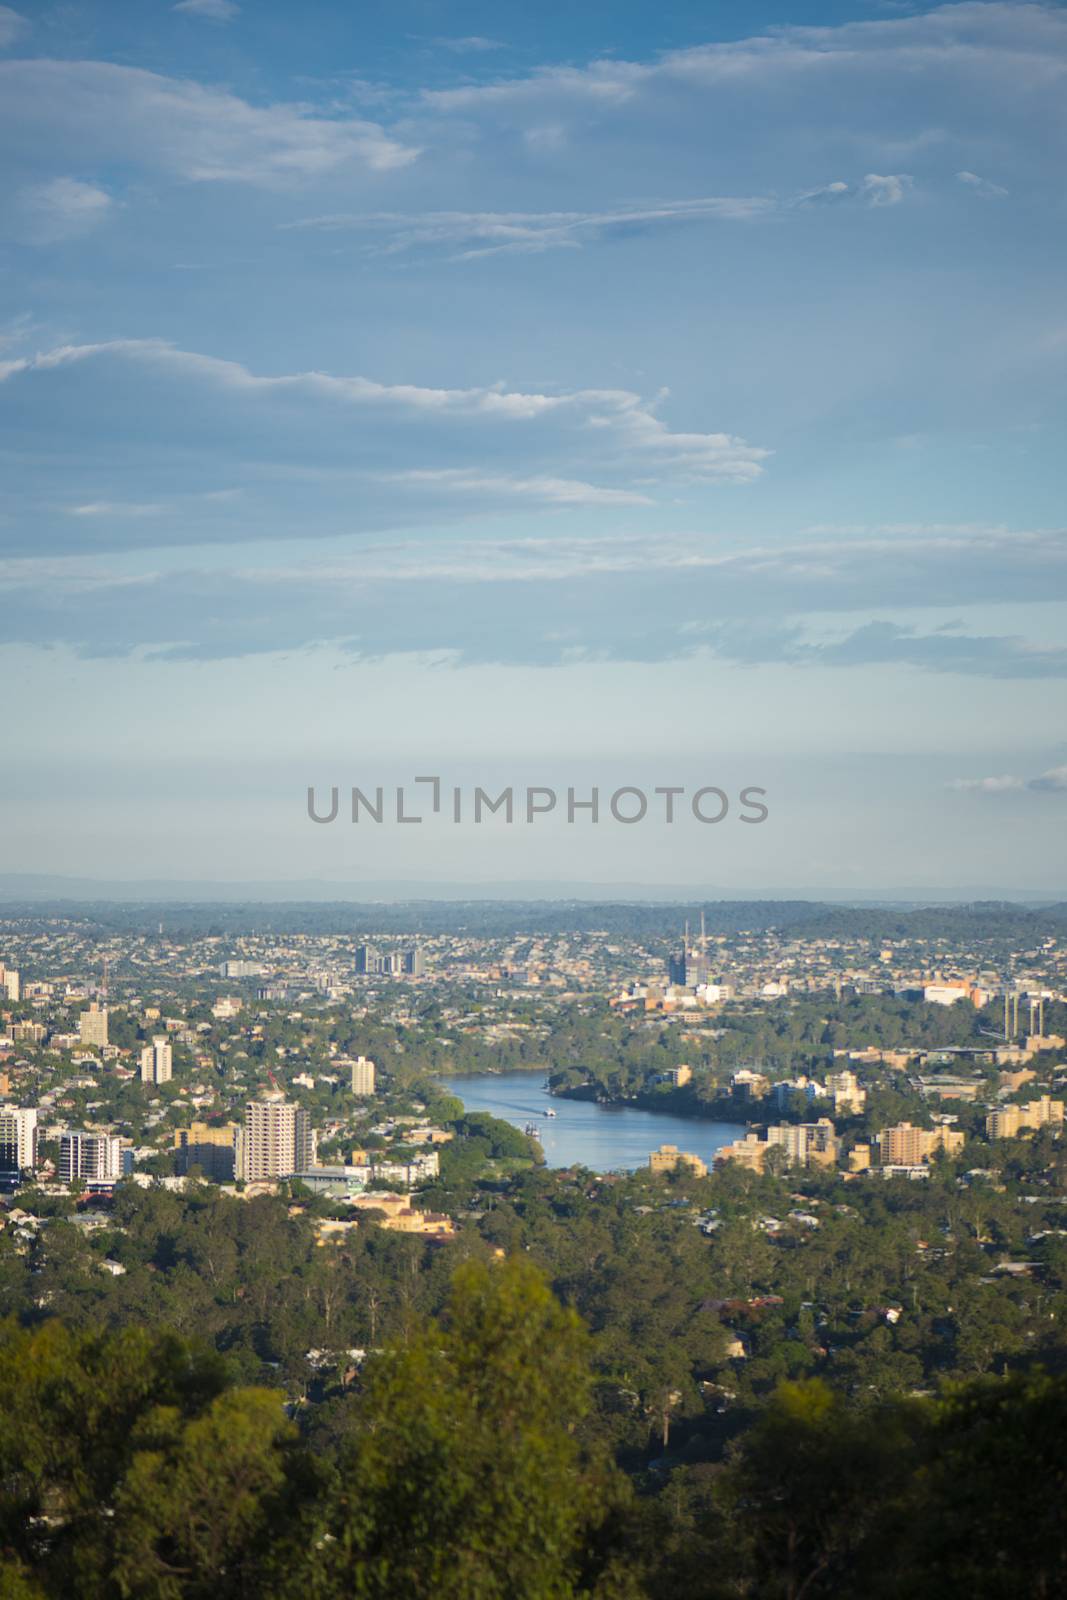 View of Brisbane and surrounding suburbs from Mount Coot-tha at during the day. Queensland, Australia.